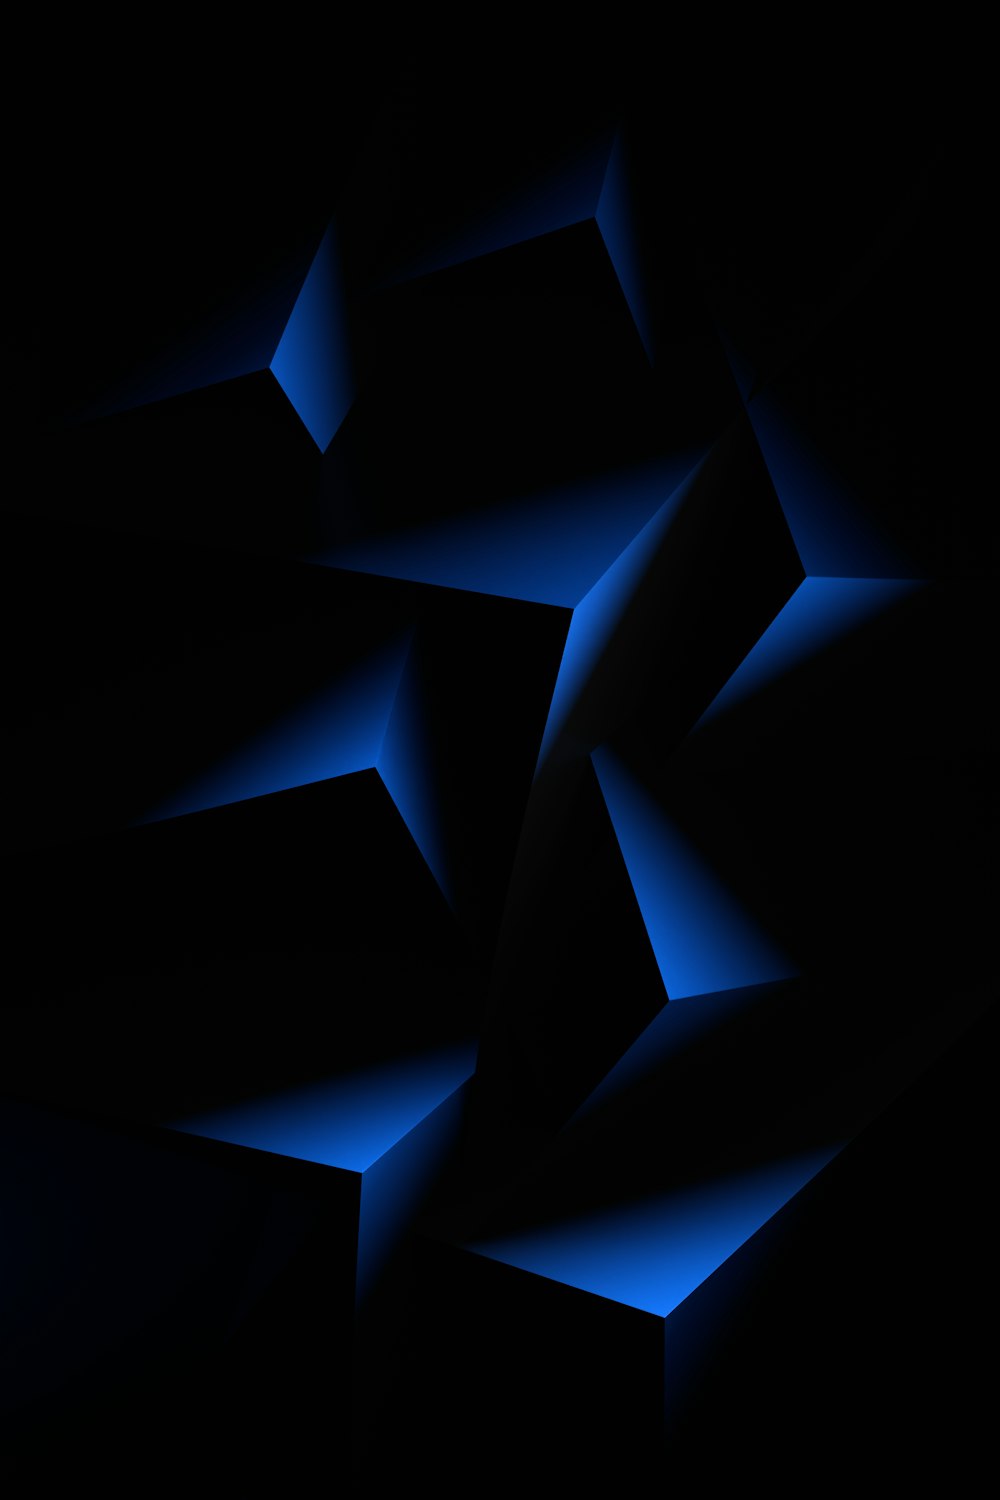 a black background with blue shapes on it